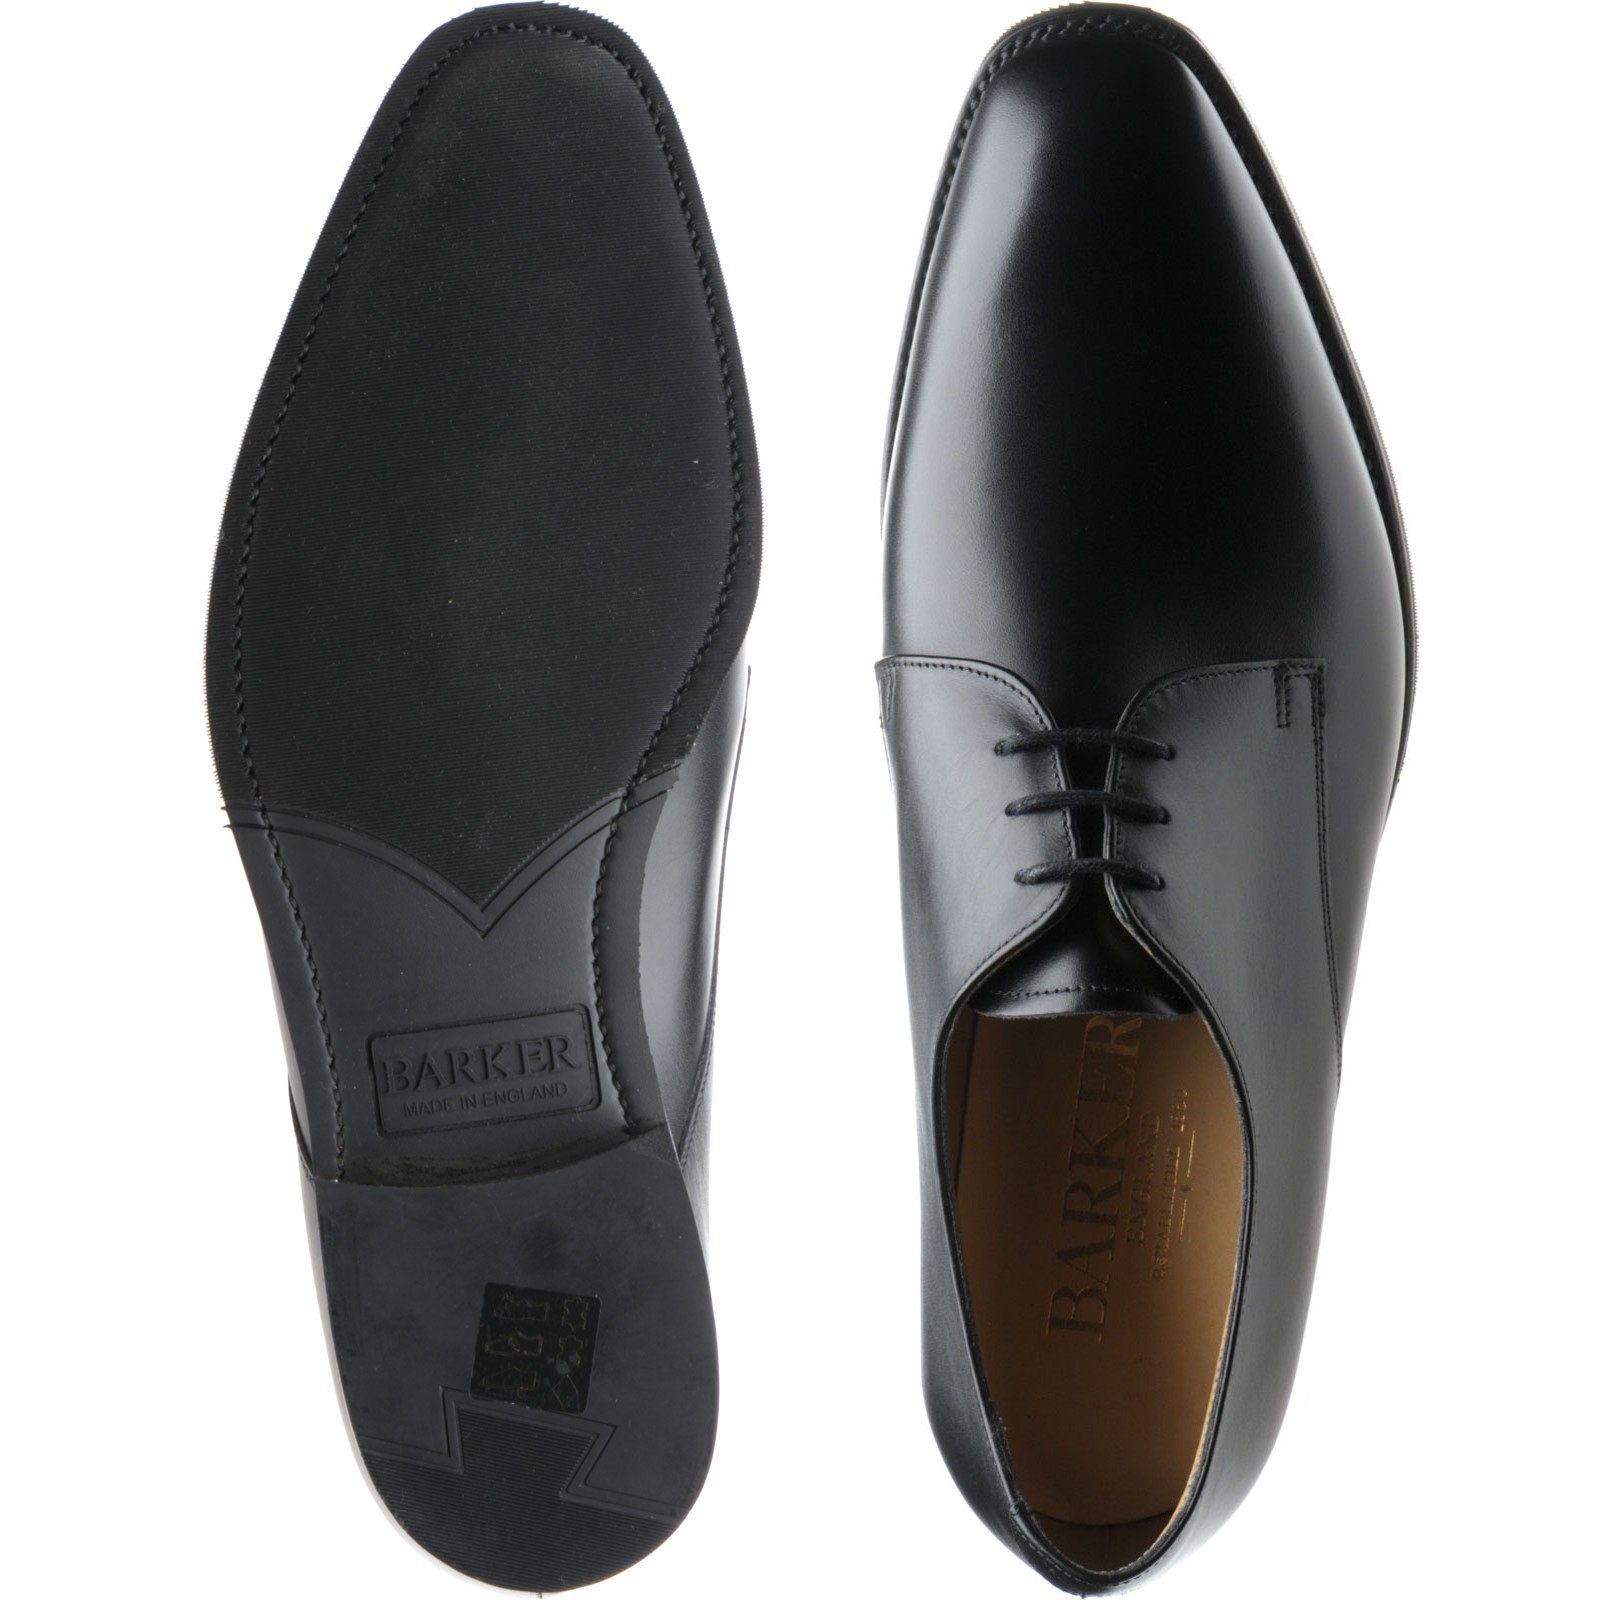 Barker shoes | Barker Professional | St Austell in Black Calf at ...